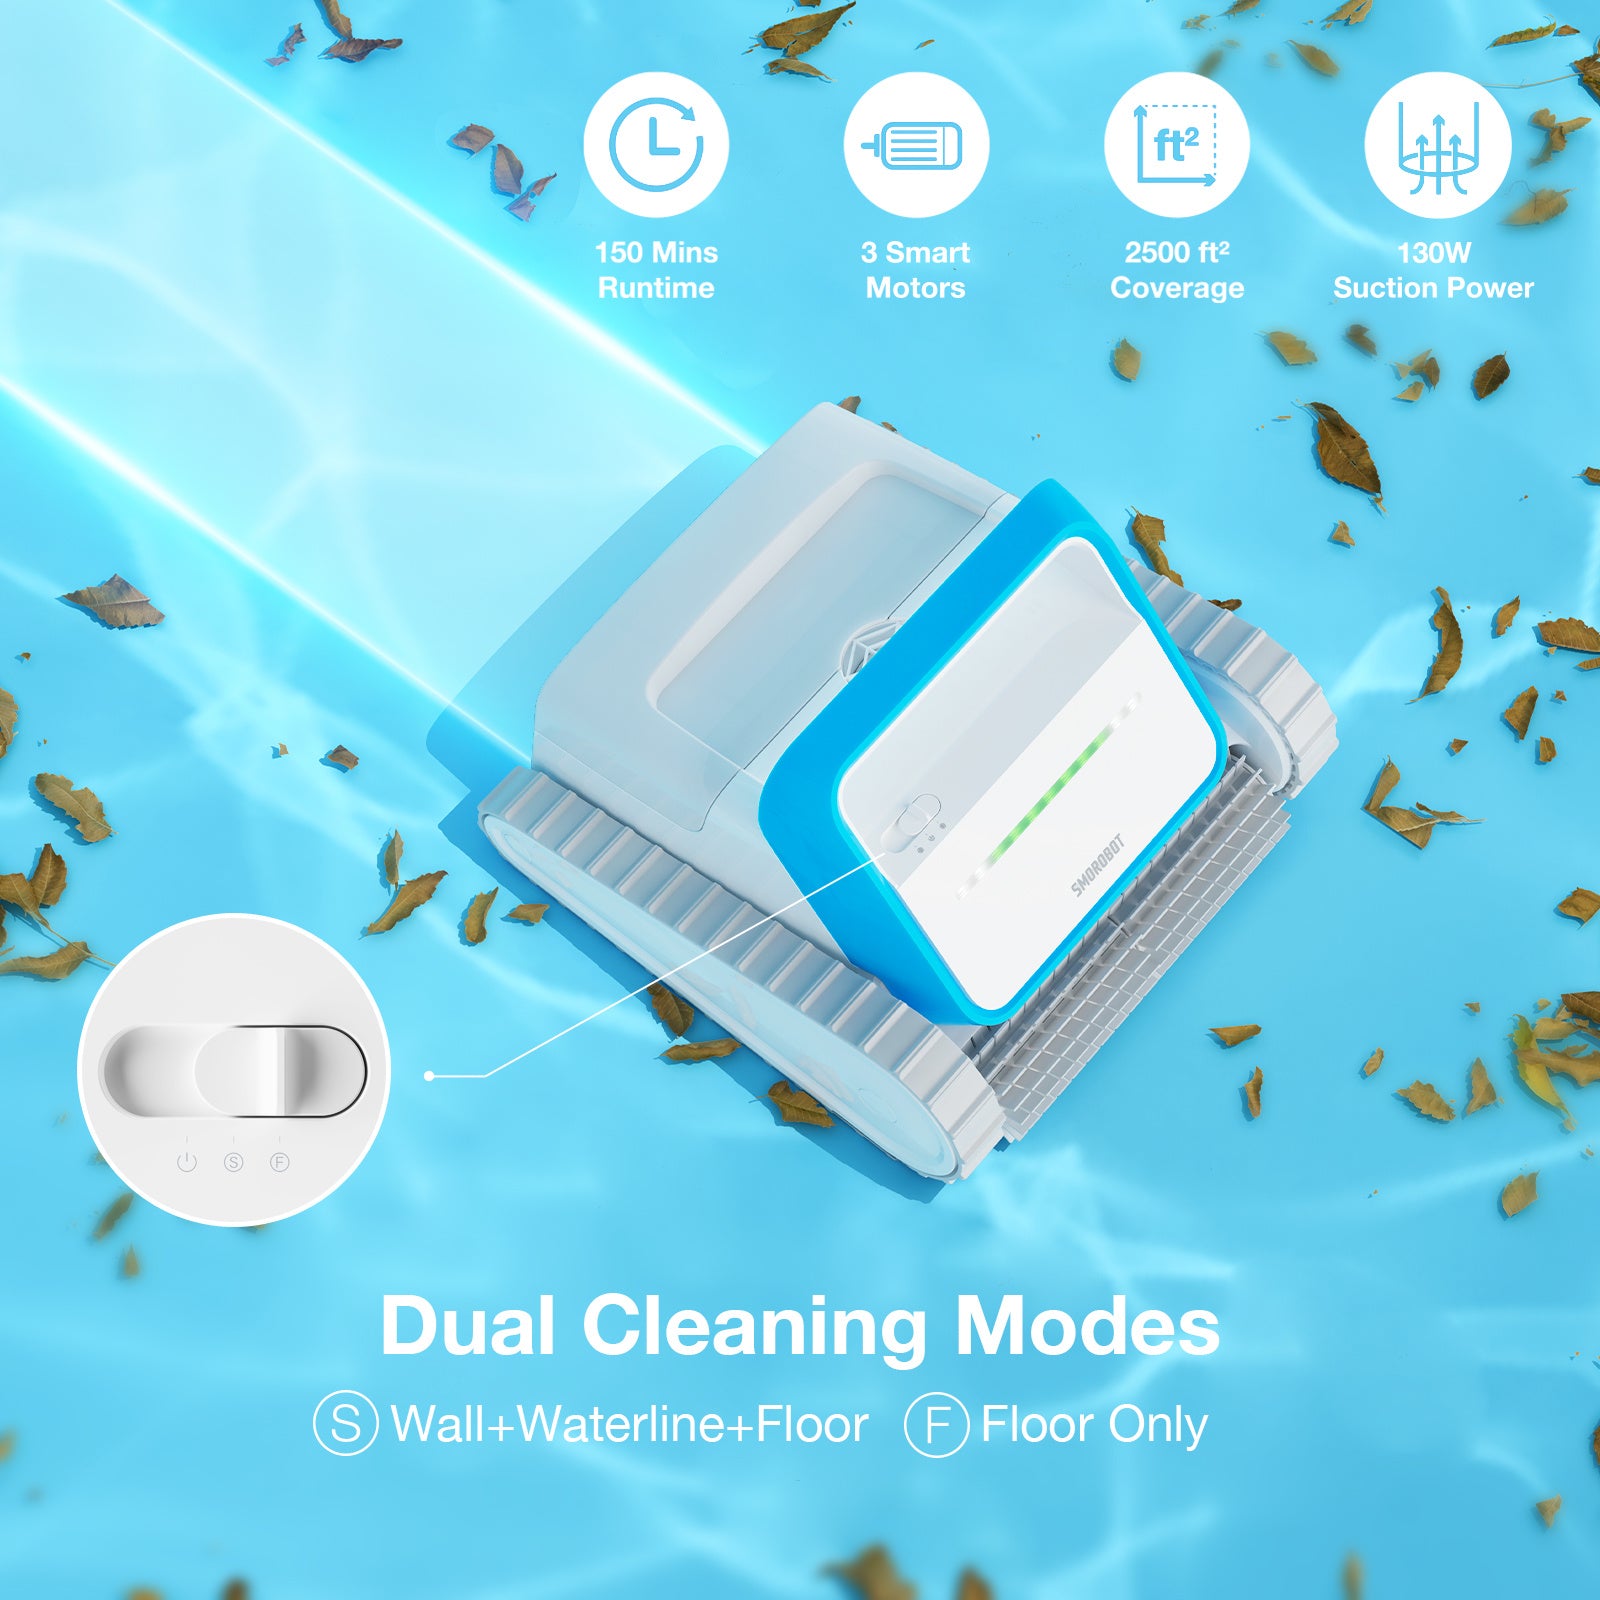 A compact, blue-and-white robotic pool cleaner with tank-like treads and a brush roller on its underside. The brand name "SMOROBOT Cordless Robotic Pool Cleaner – Automatic Wall Climbing Pool Vacuum Cleaner, Smart Navigation, Self-Parking, Lasts 150 Mins with 130W Suction Power, Ideal for In-Ground Pools up to 2500 ft²" is printed on its front. This wall climbing robot ensures every inch of your pool is spotless.